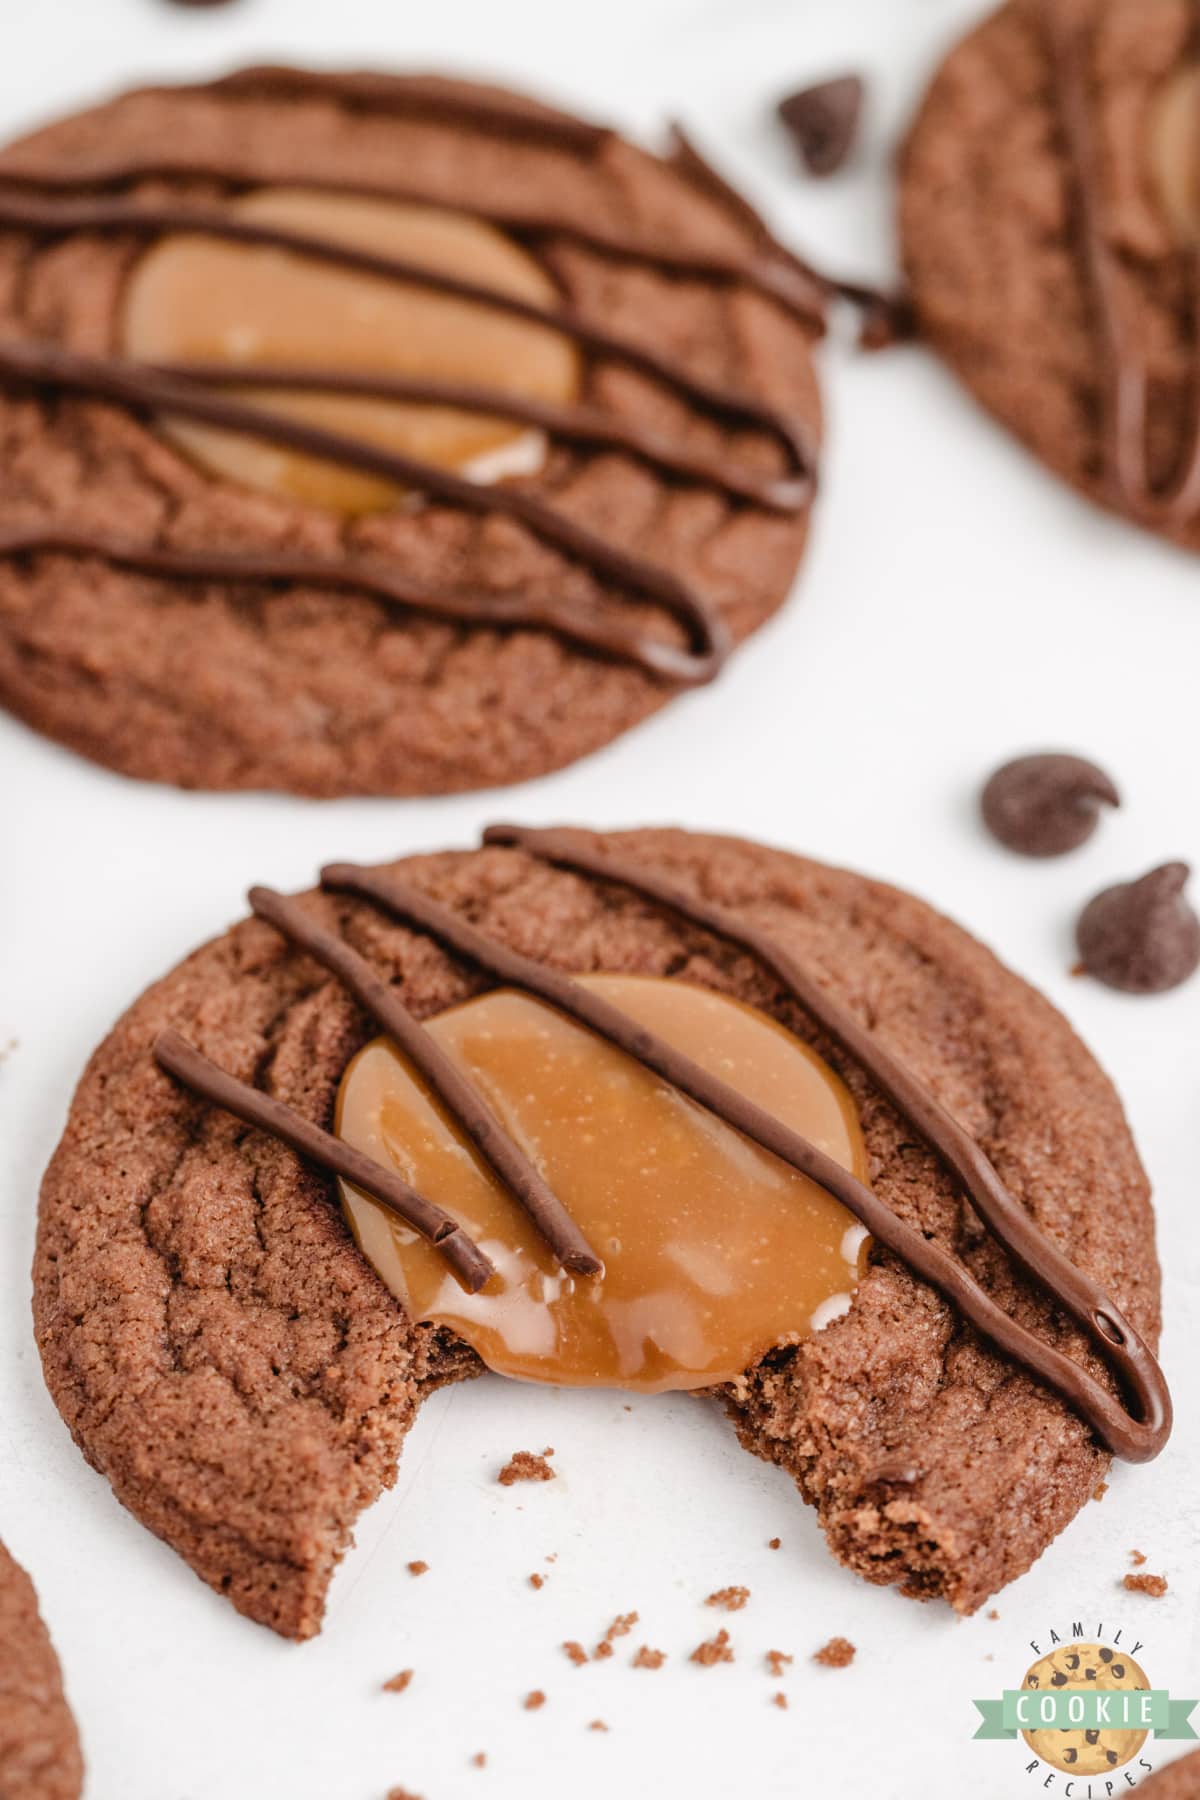 Chocolate cookies with a caramel filling. 